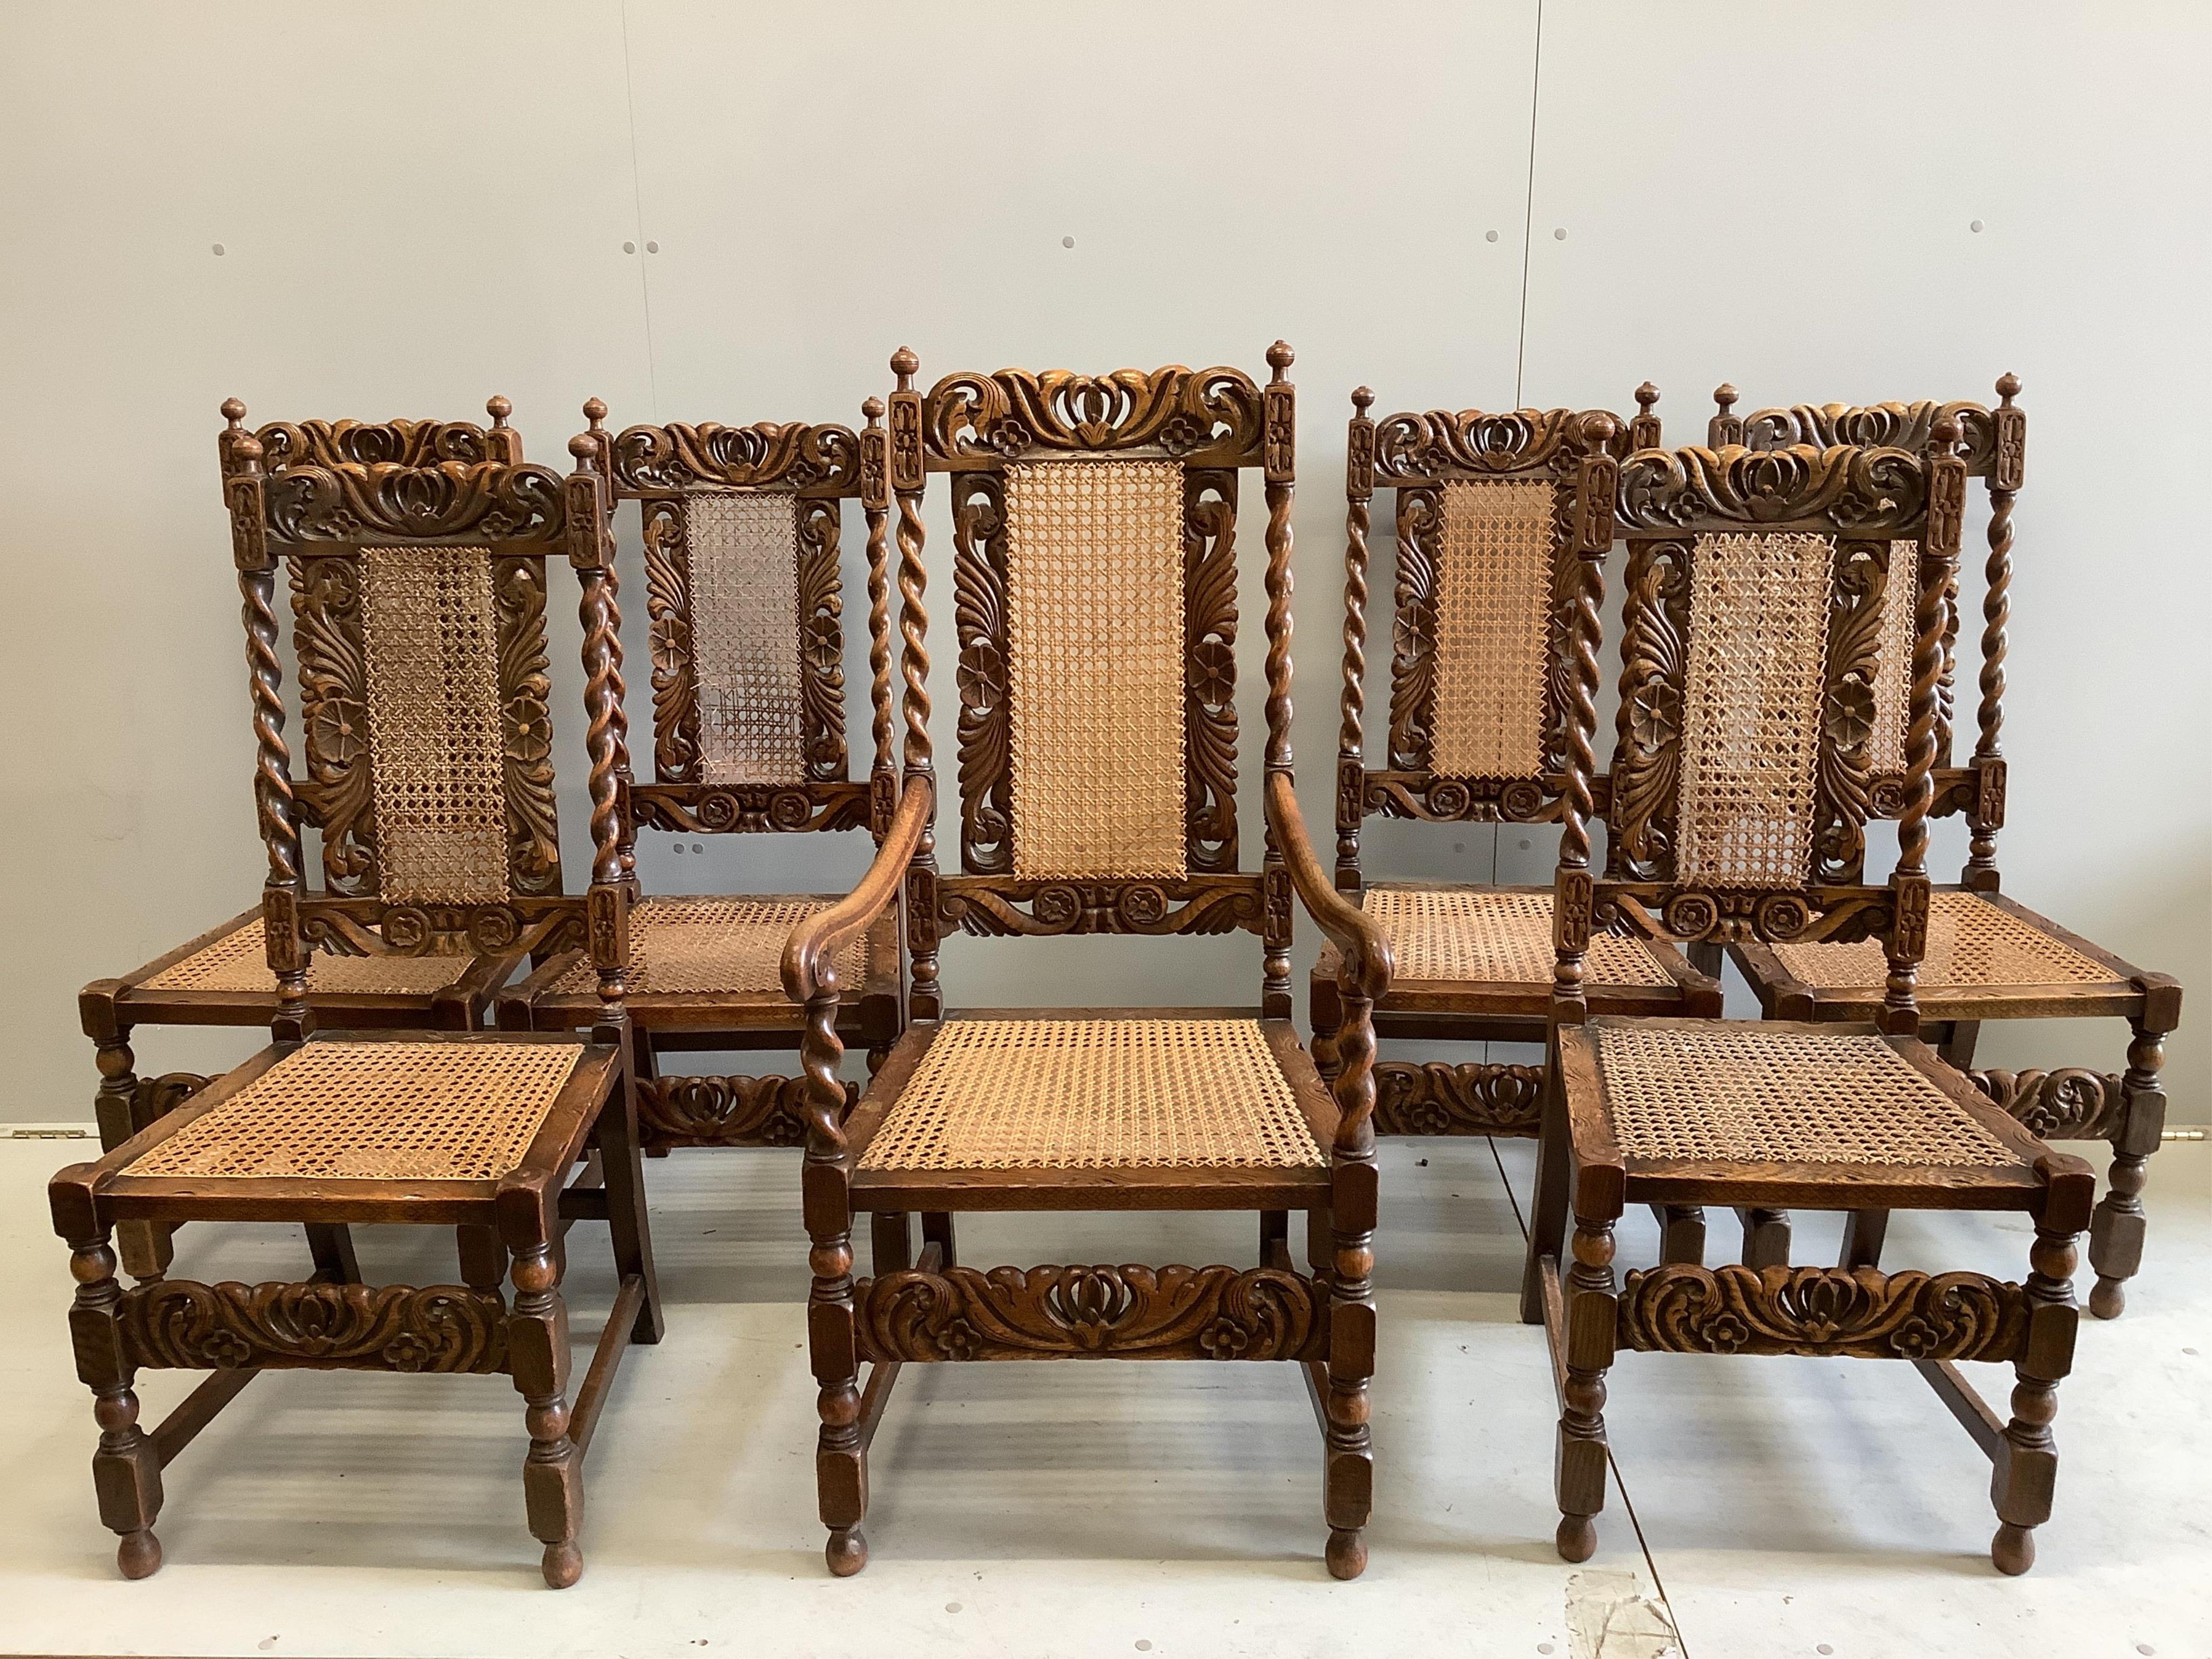 A set of seven Jacobean Revival caned oak dining chairs, one with arms. Condition - fair